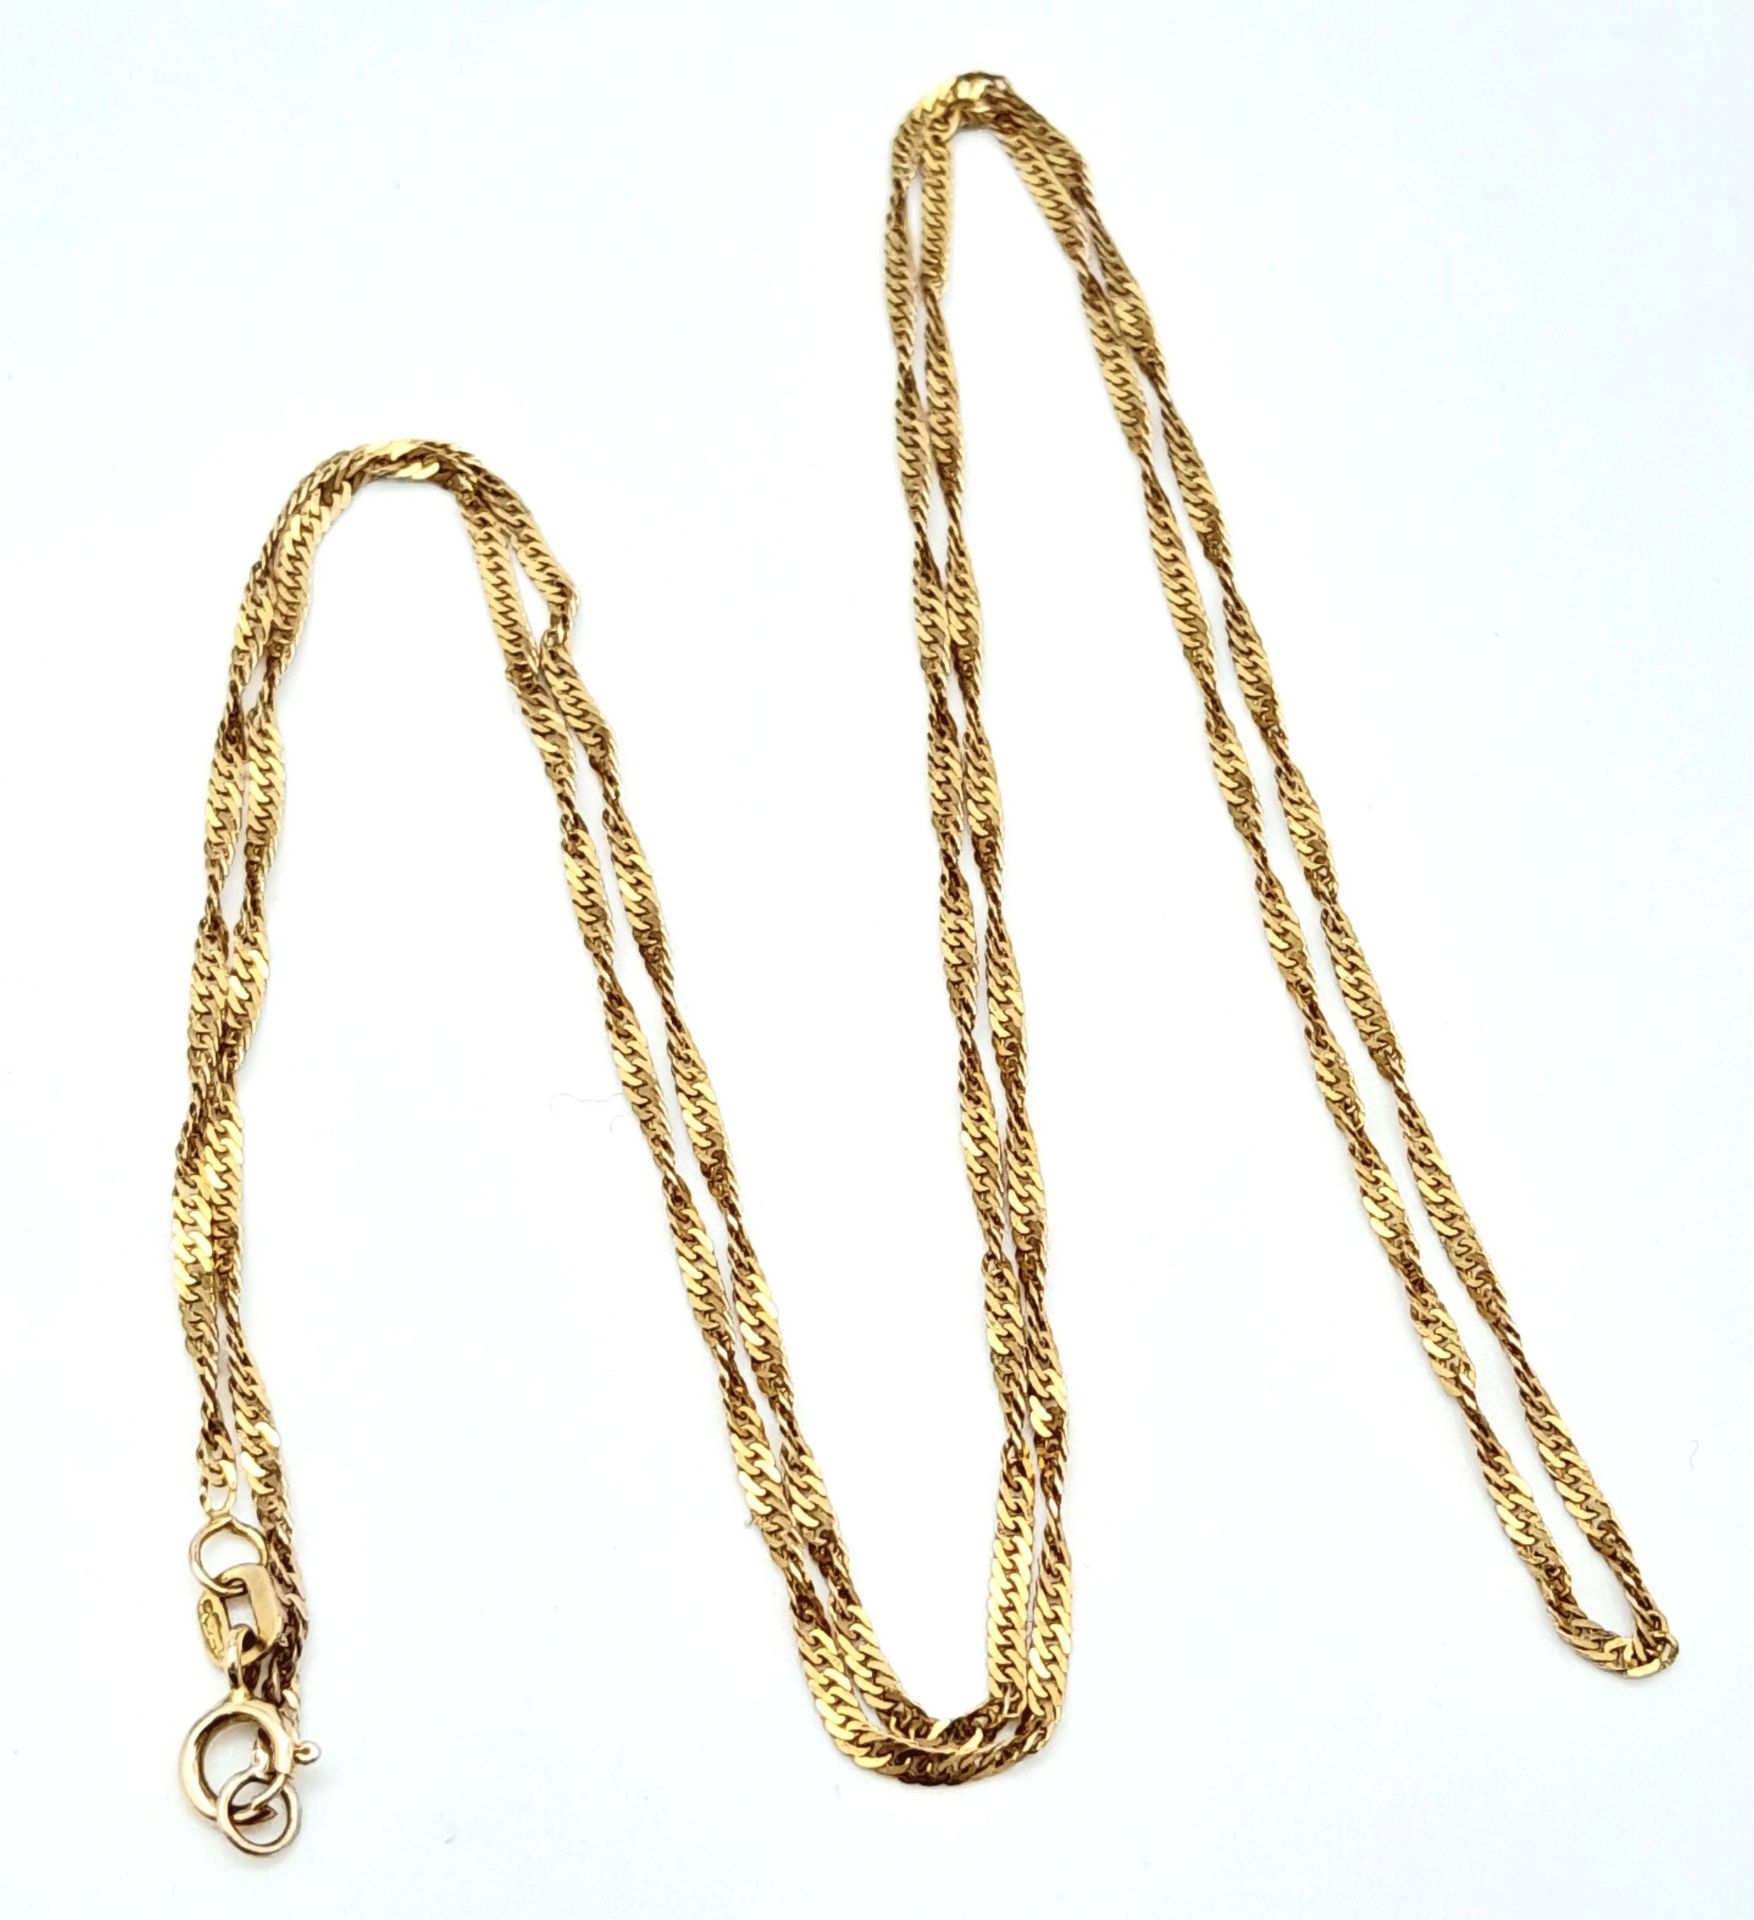 An elegant 9 K yellow gold rope chain necklace, length: 61 cm, weight: 2.3 g. - Image 4 of 11